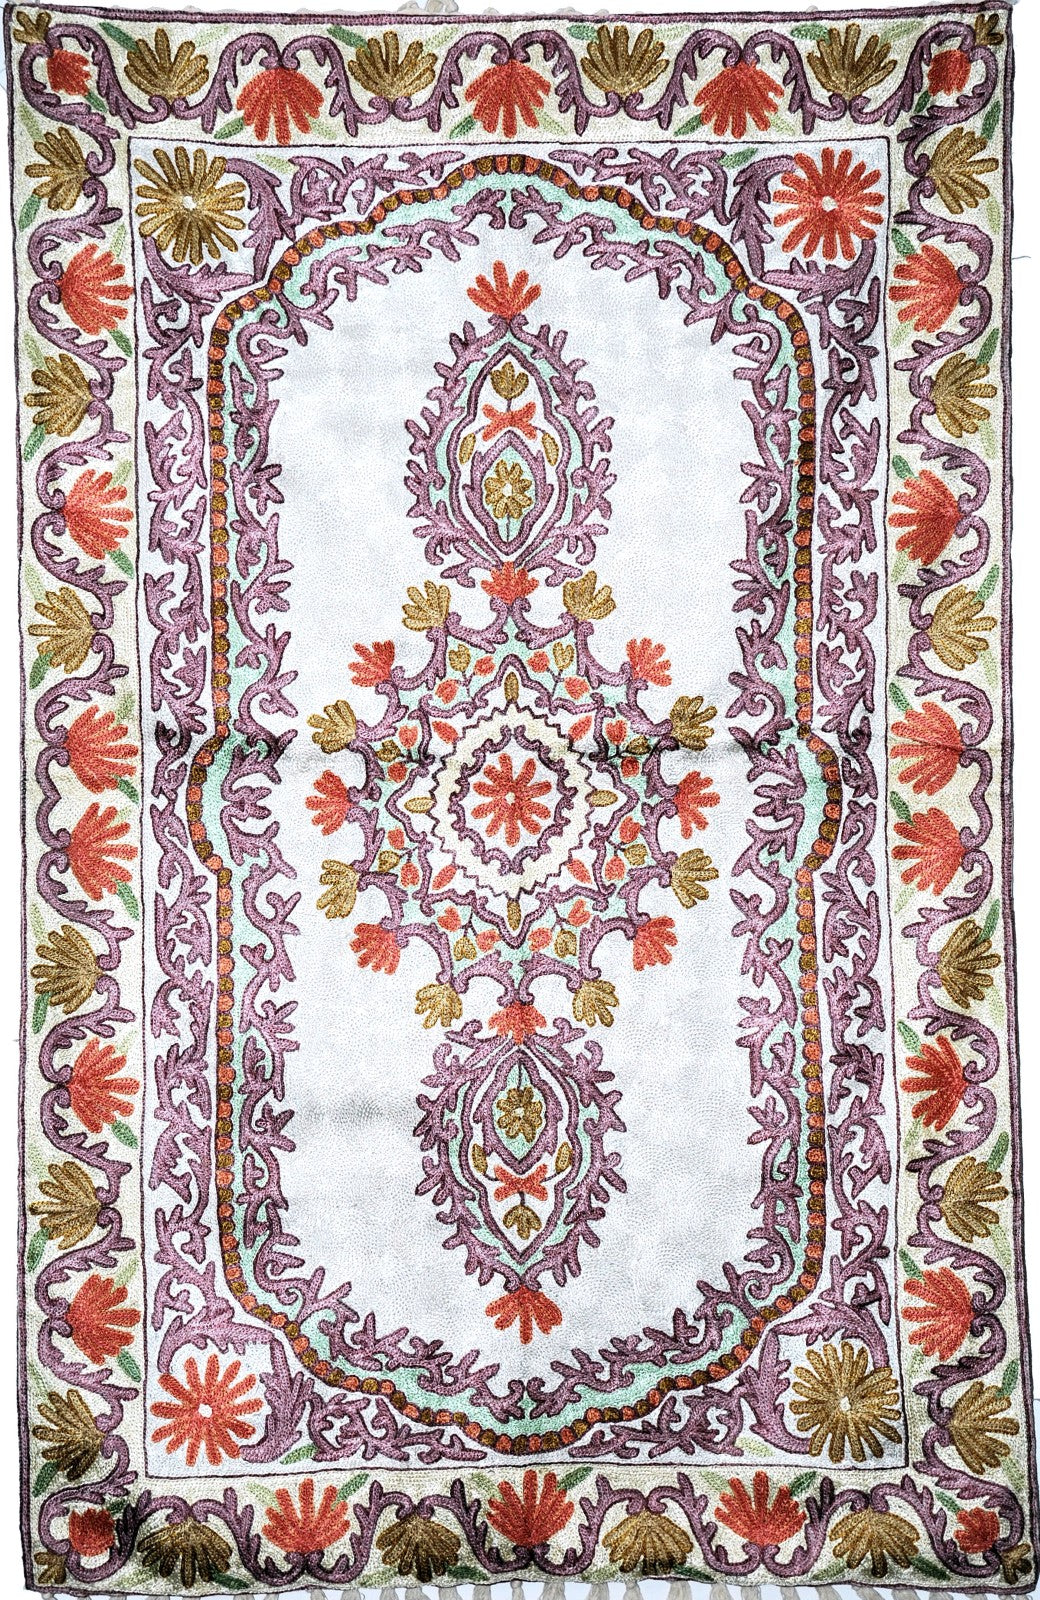 ChainStitch Tapestry Silk Area Rug, Multicolor Embroidery 2.5x4 feet #CWR10110